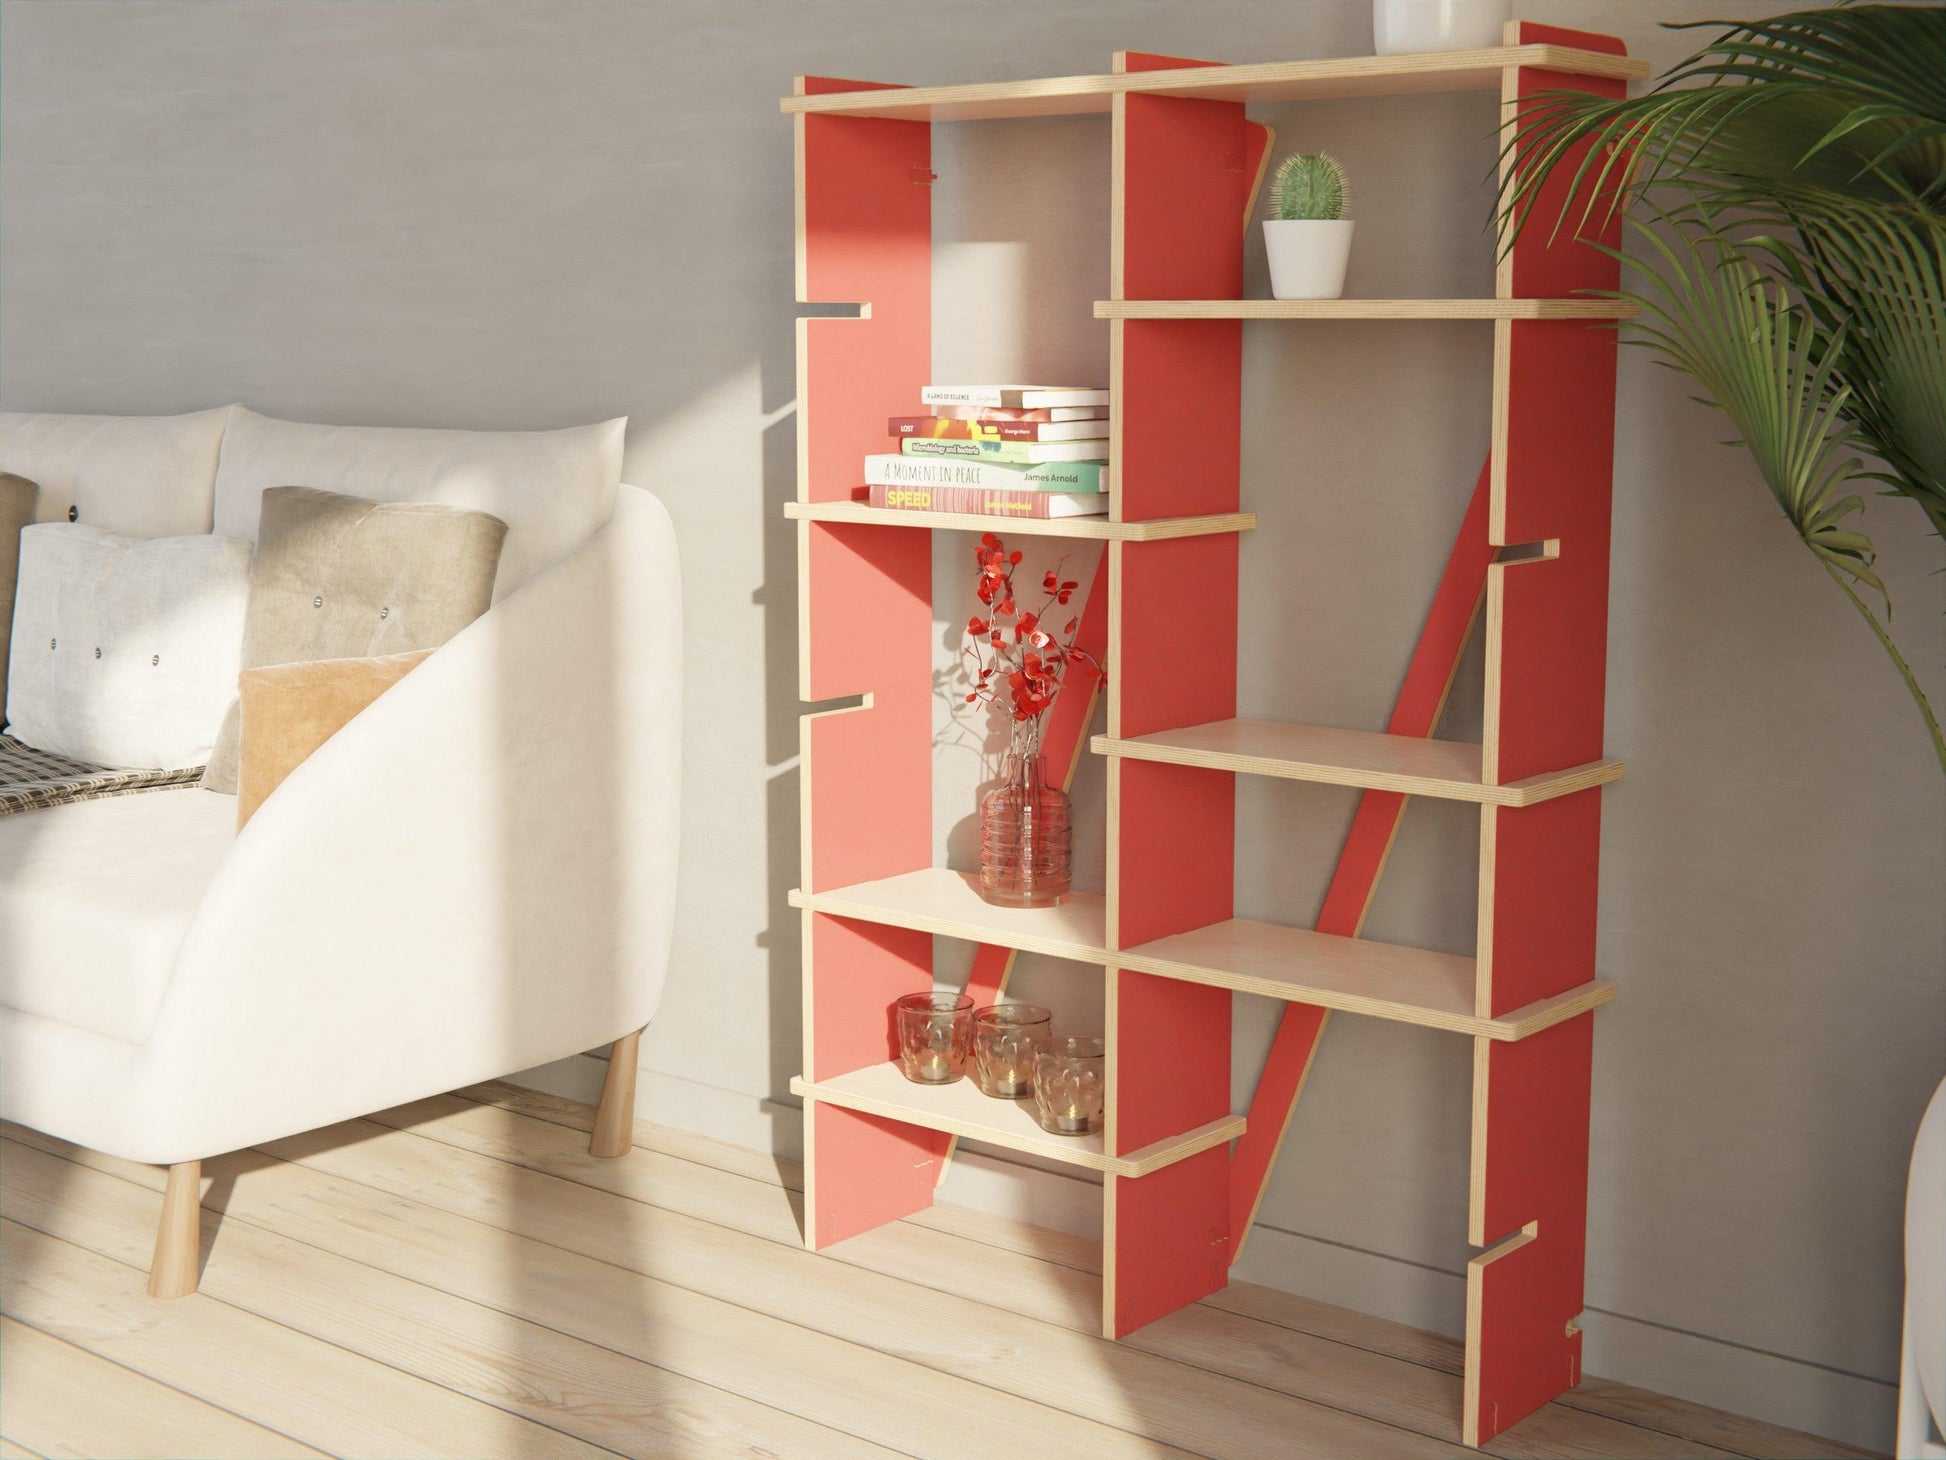 Immerse in elegance with our modular red shelving units. The ultimate solution for efficient and stylish storage.